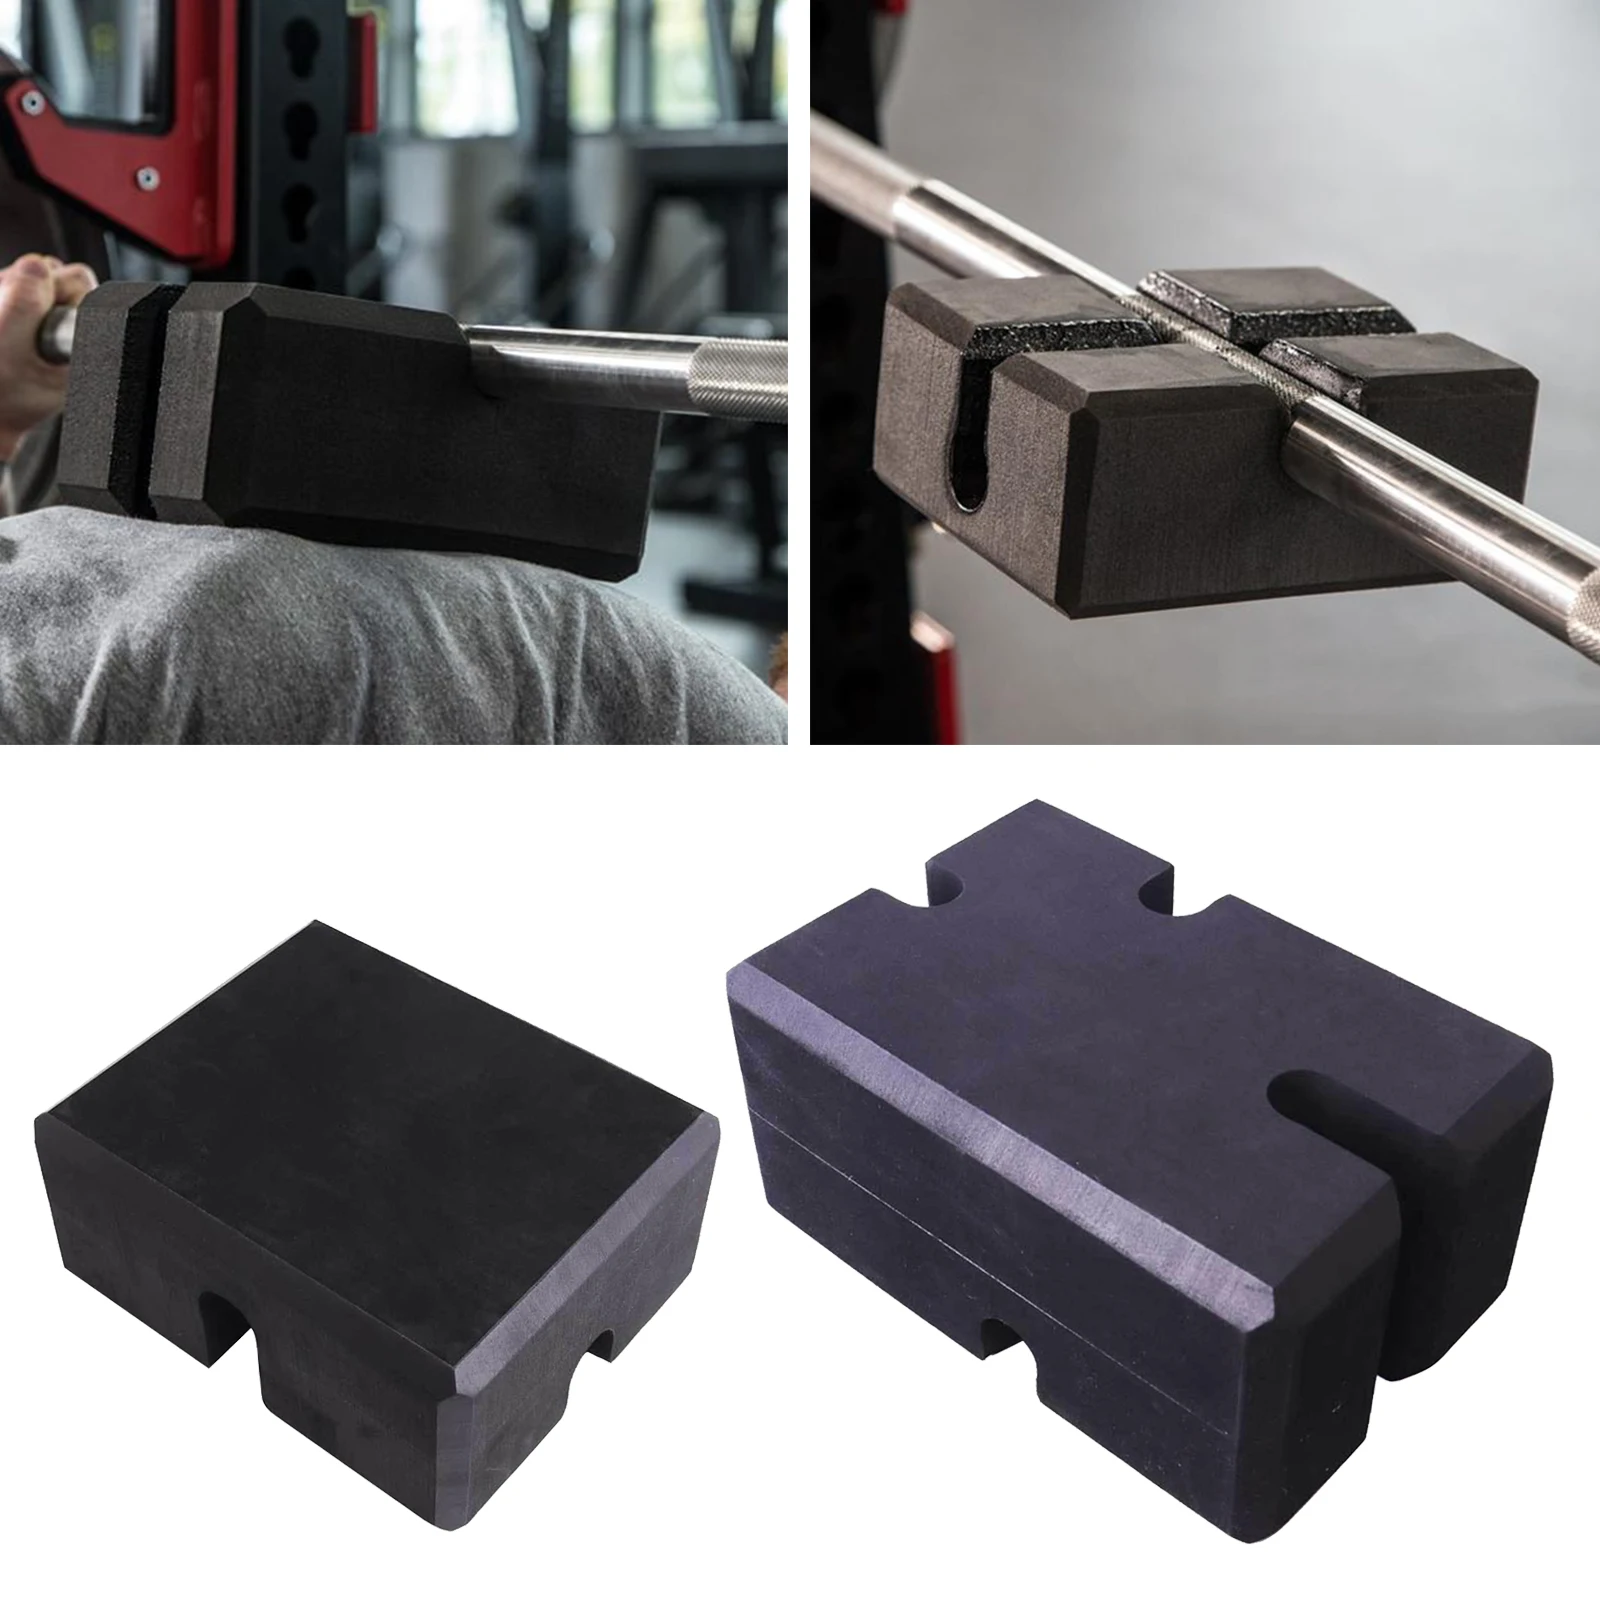 Home Gym Workout Fitness Accessories for Increase Your Bench Press Adjustable 2-5 Bench Board LARA STAR Bench Press Block Press Blocks Boards 